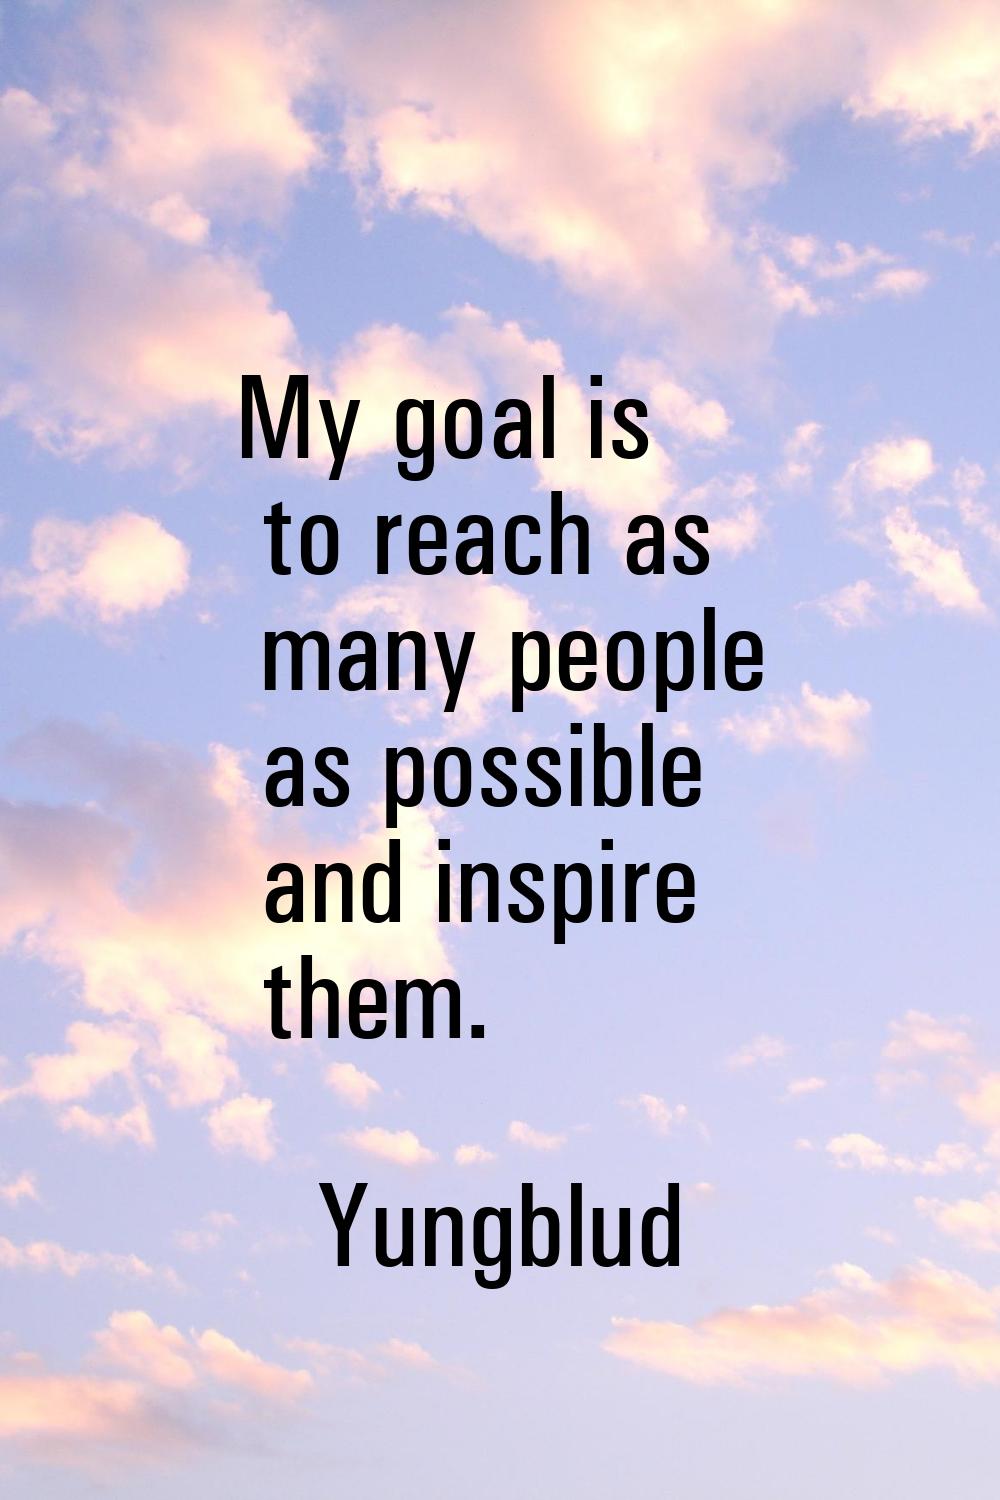 My goal is to reach as many people as possible and inspire them.